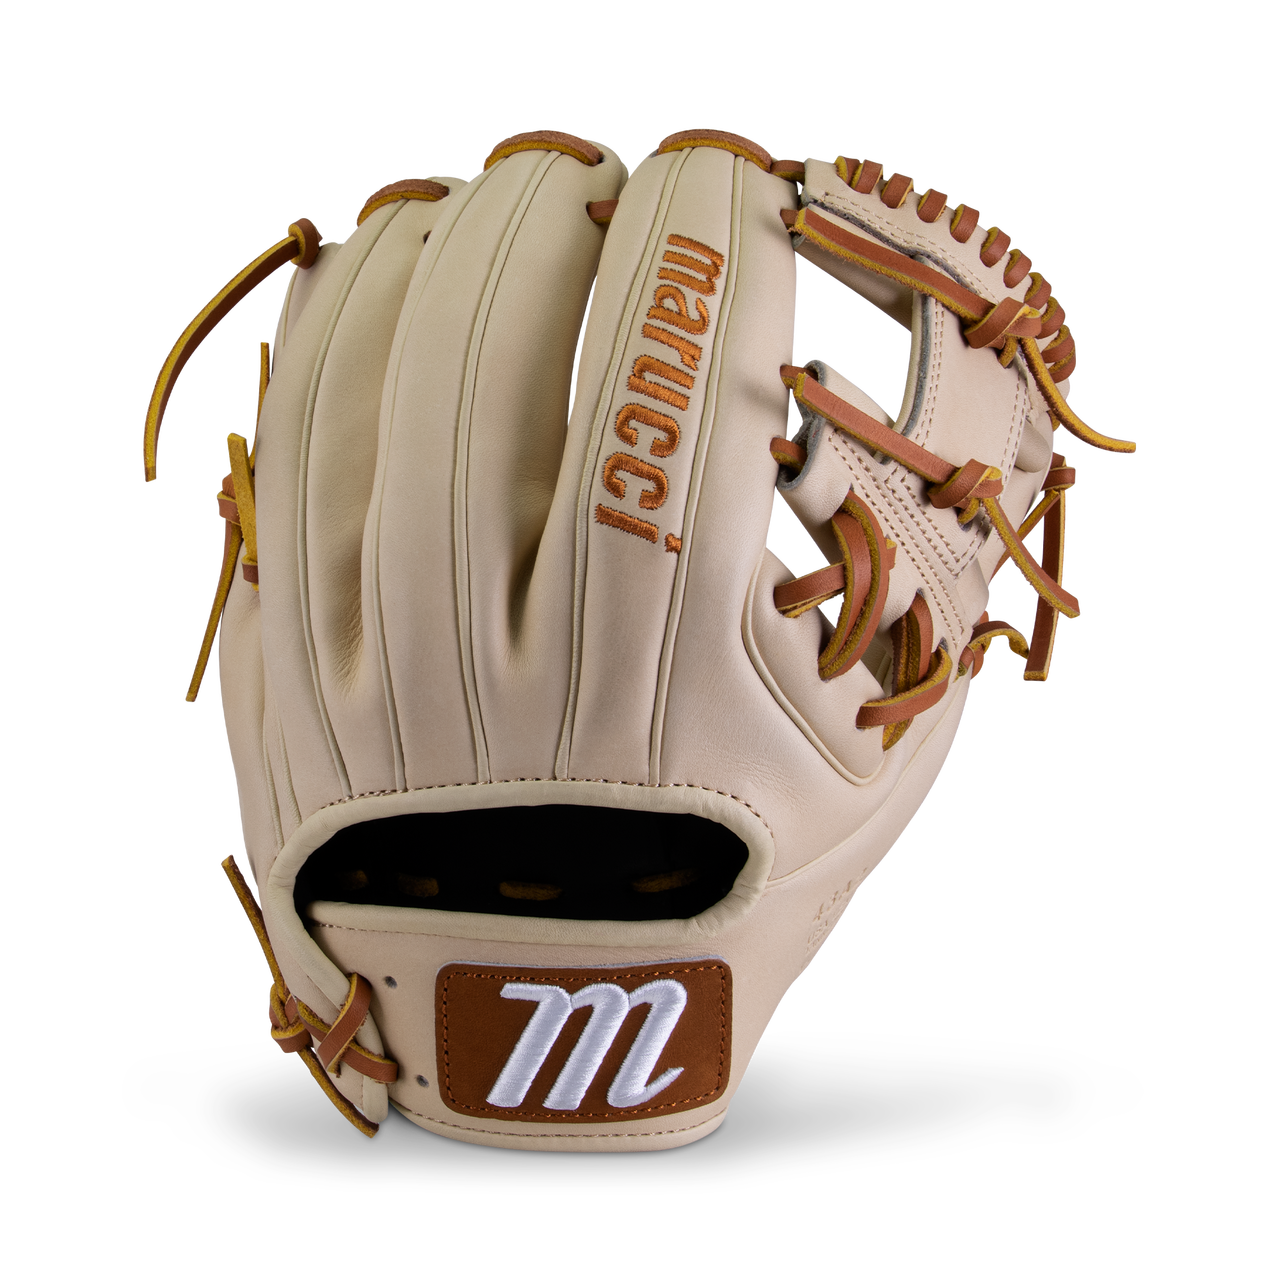 marucci-cypress-m-type-43a2-baseball-glove-11-5-inch-right-hand-throw MFGCYM43A2-CMTF-RightHandThrow   CYPRESS M TYPE 43A2 11.5 I-WEB M Type fit system provides integrated